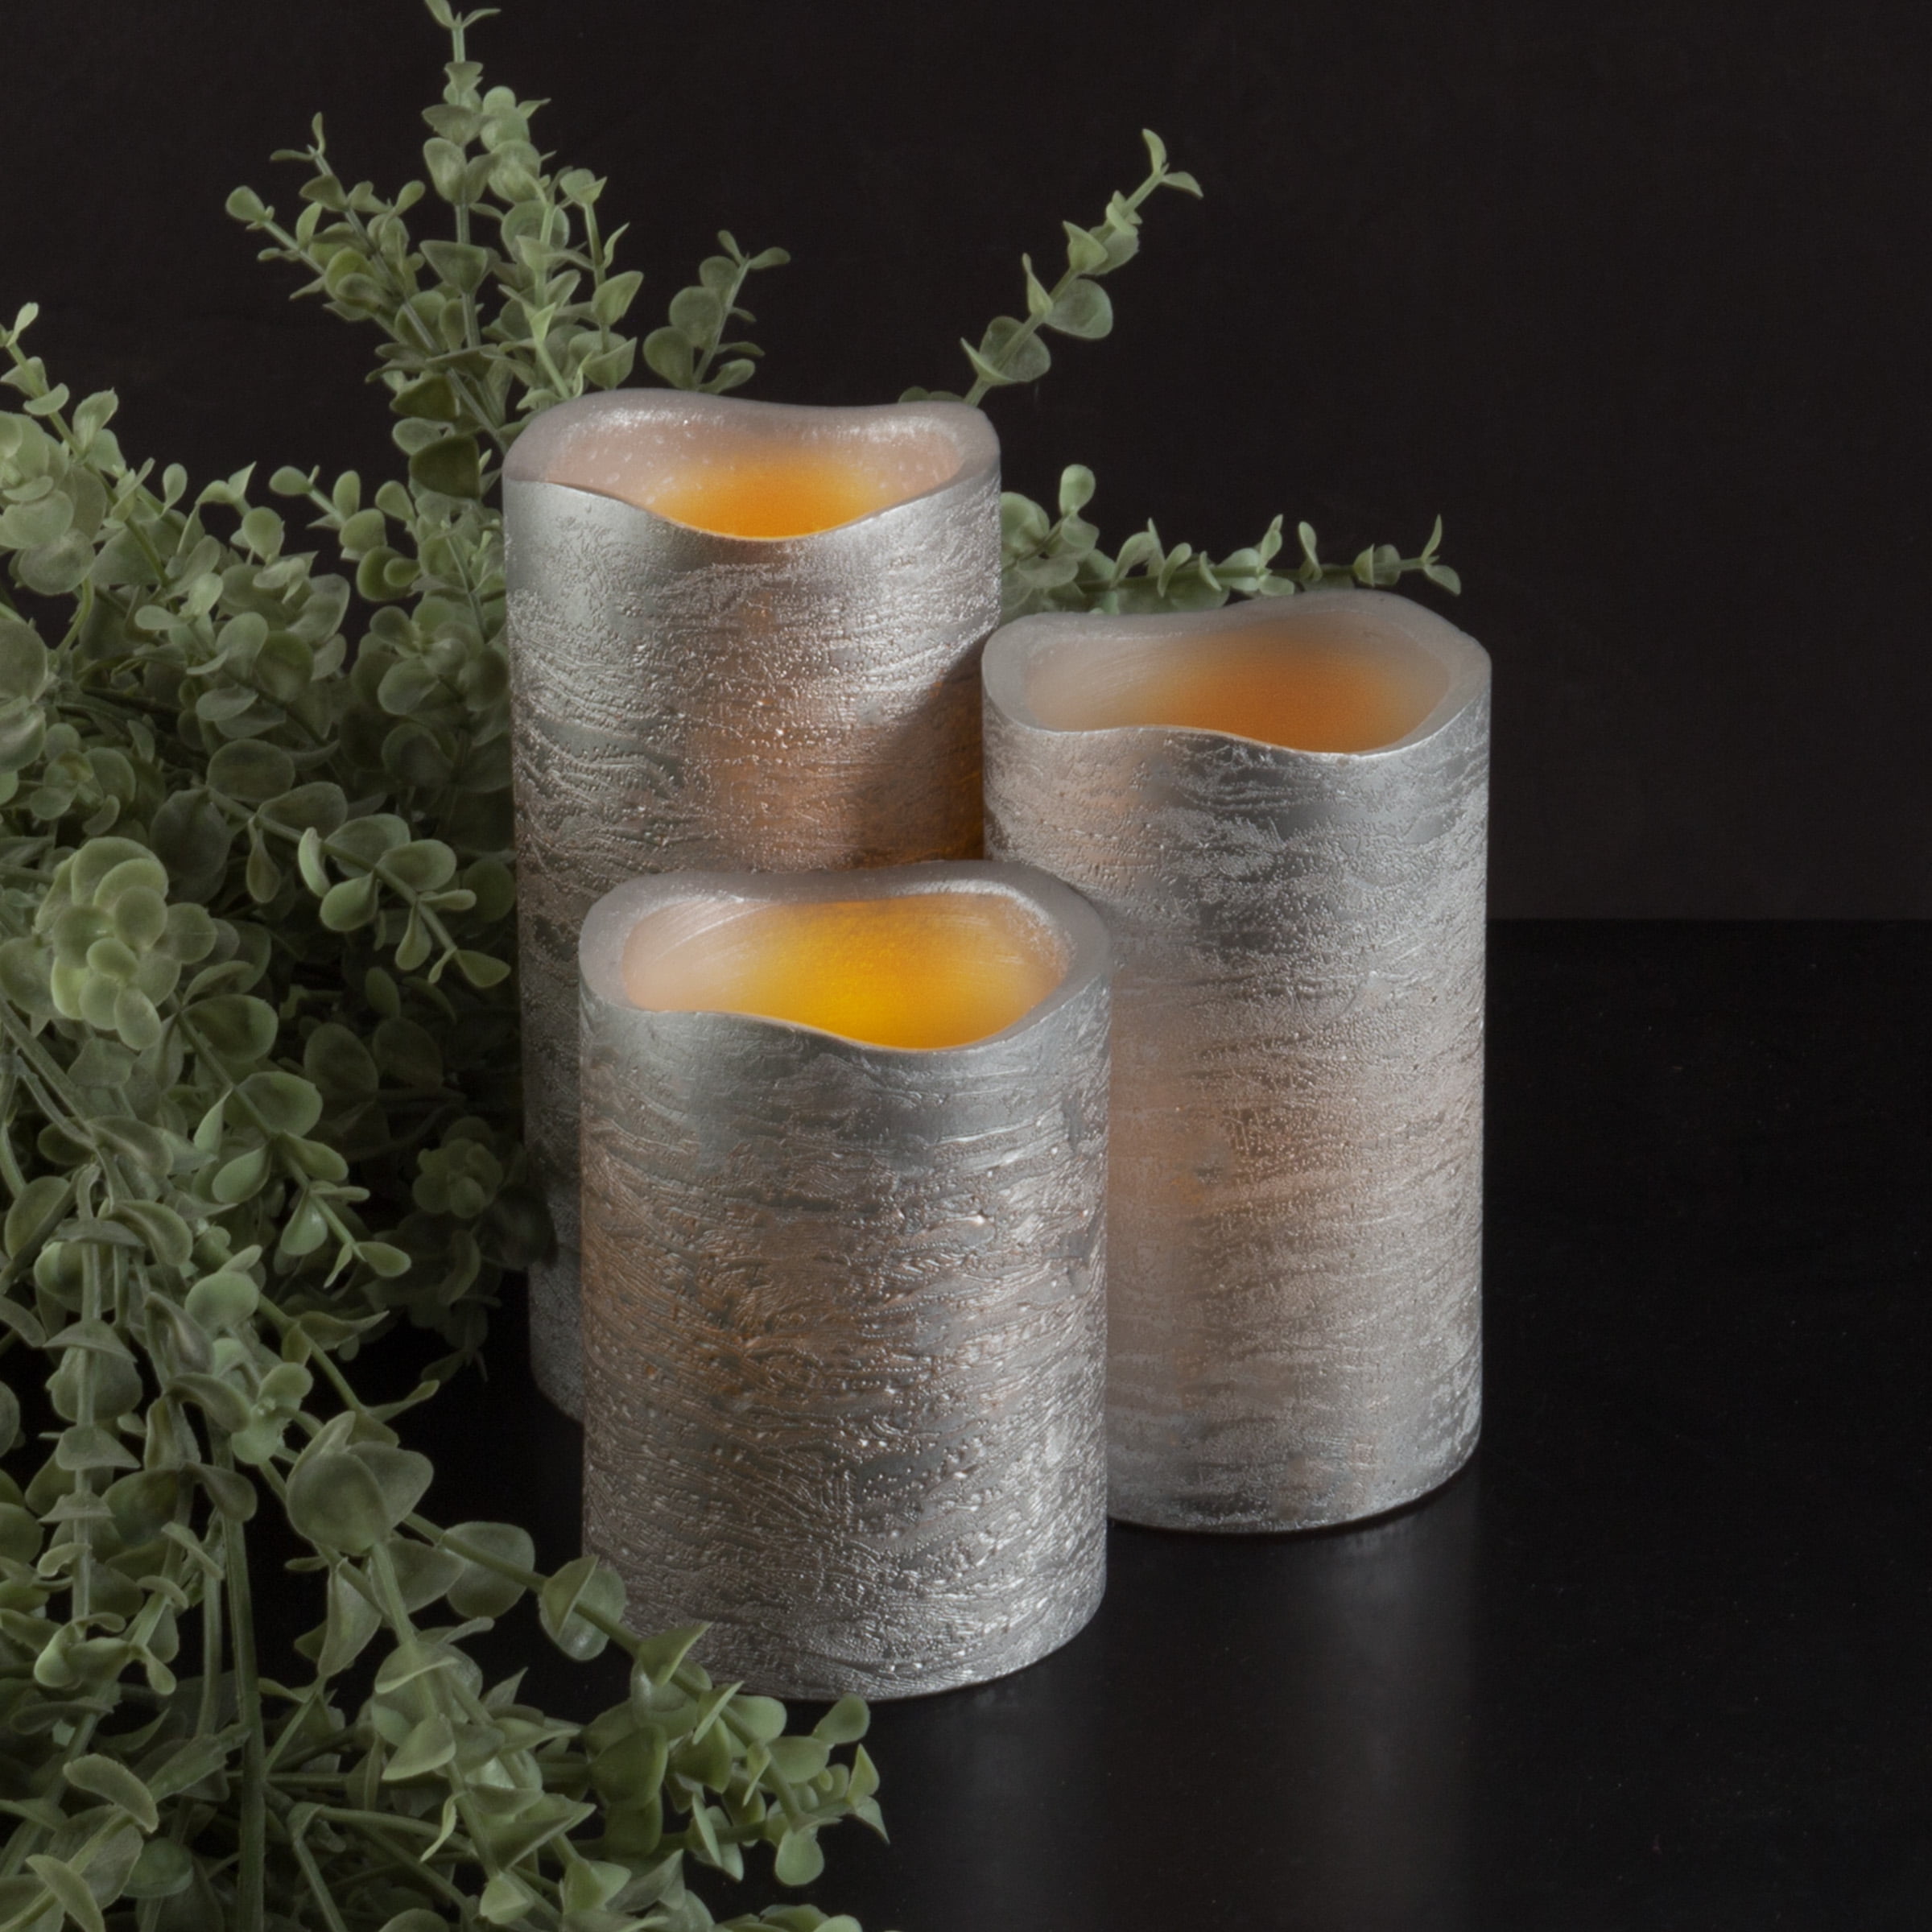 Lavish Home LED Candles with Remote Control-Set of 3 Lace Detailed Vanilla Scented Wax Realistic Flameless Pillar Lights-Ambient Home Décor 